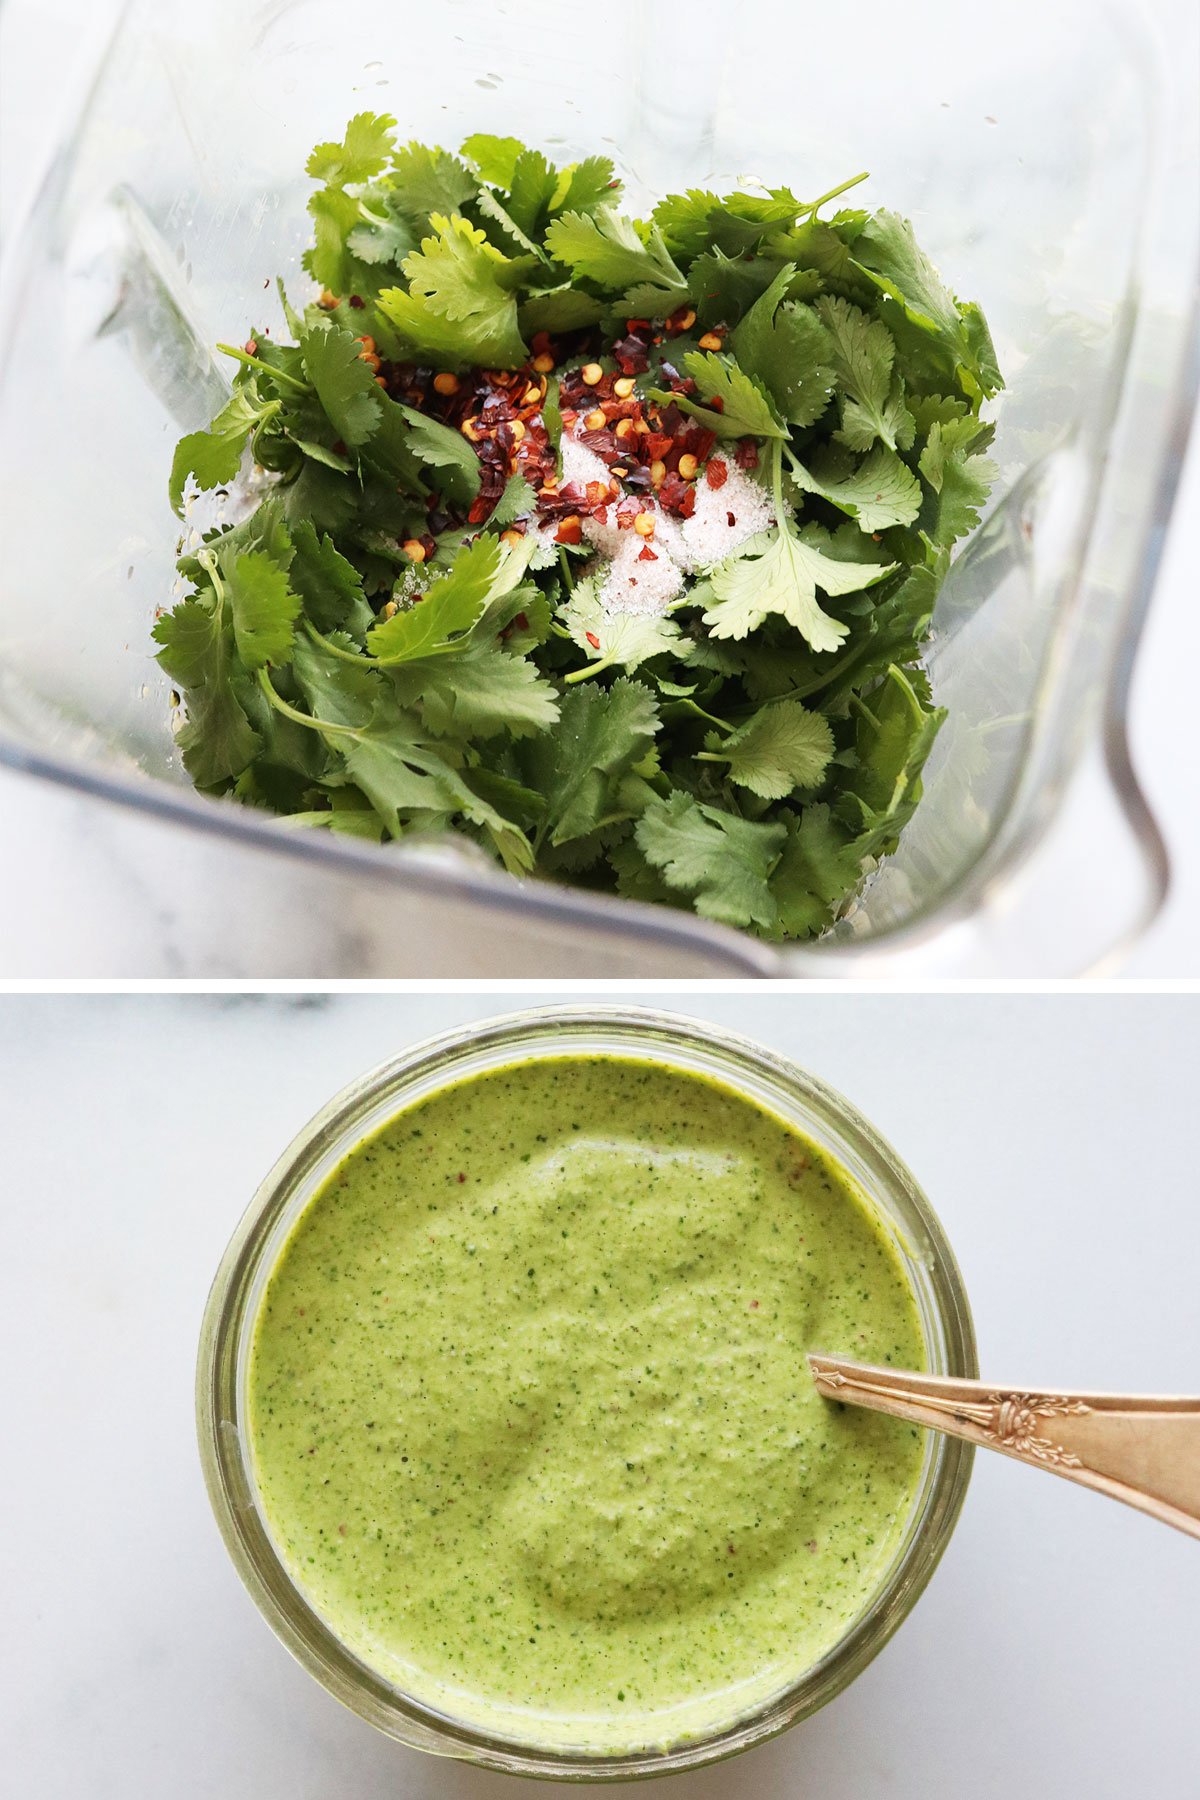 cilantro sauce before and after blending.